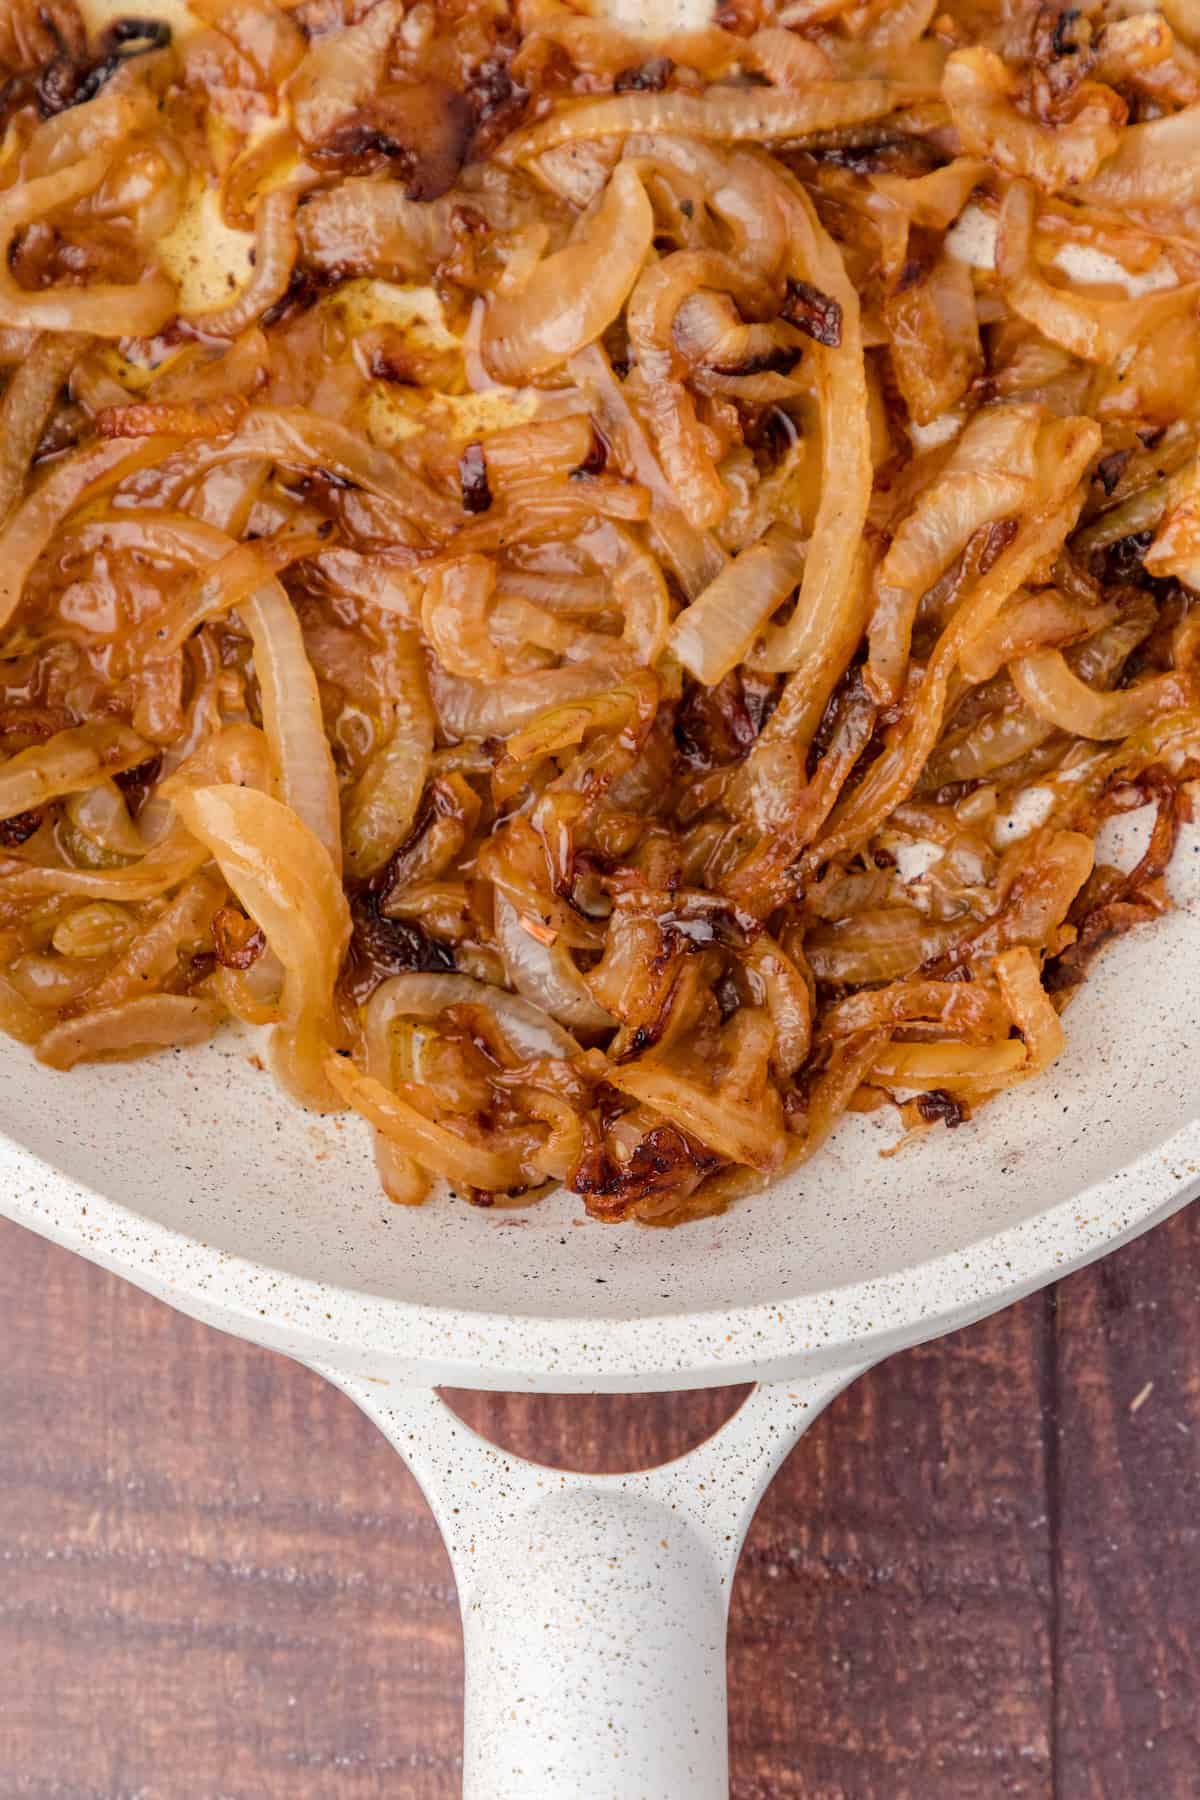 continue to cook the onions until they are browned and very soft